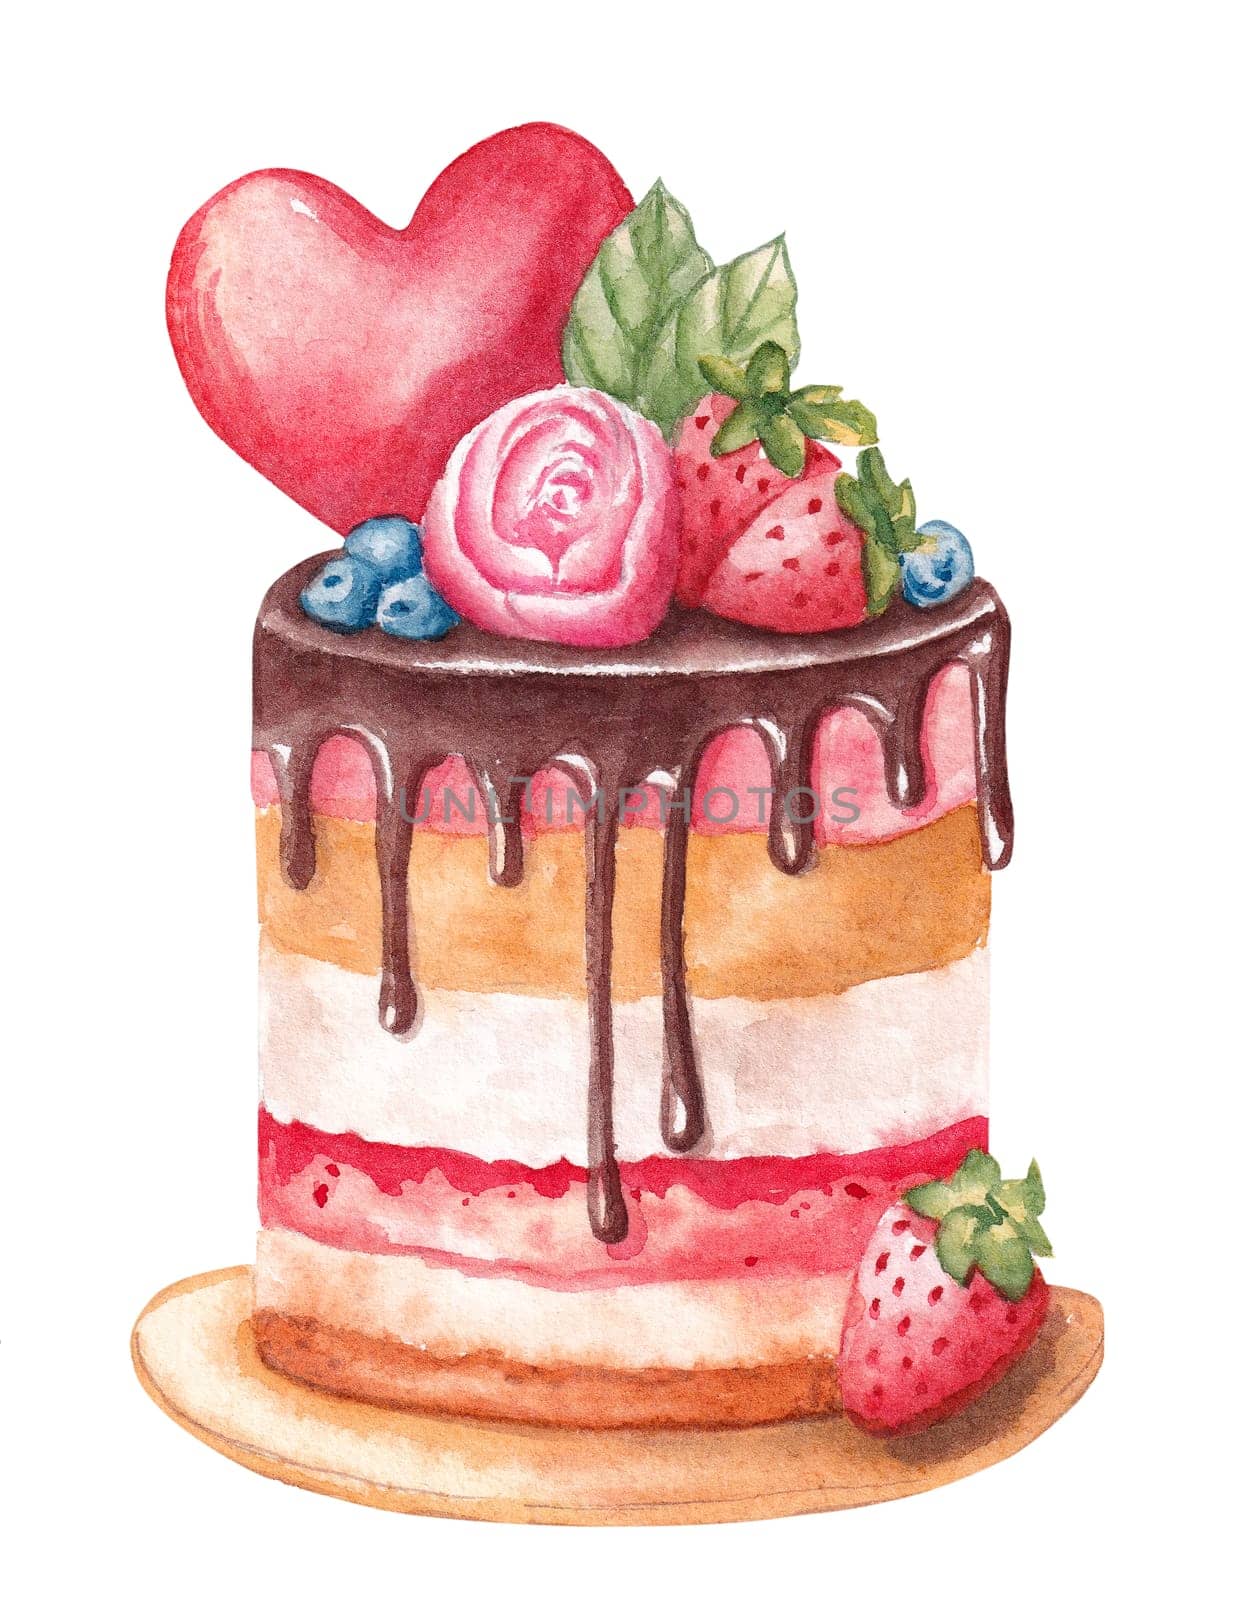 Tasty homemade valentines day cake on white background, watercolor illustration by Desperada